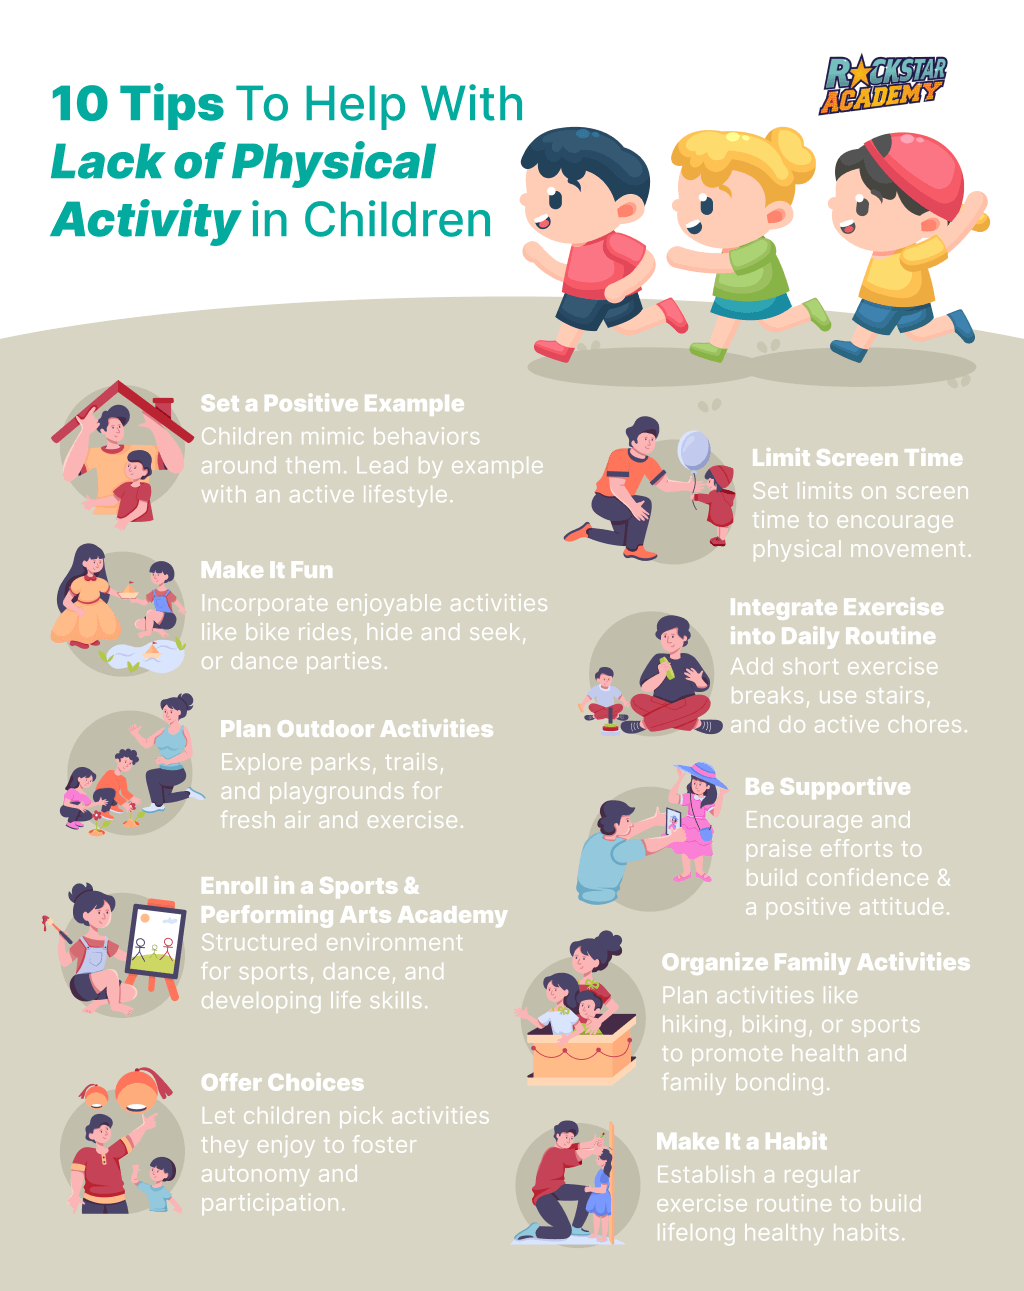 10 tips to help with lack of physical activity in children